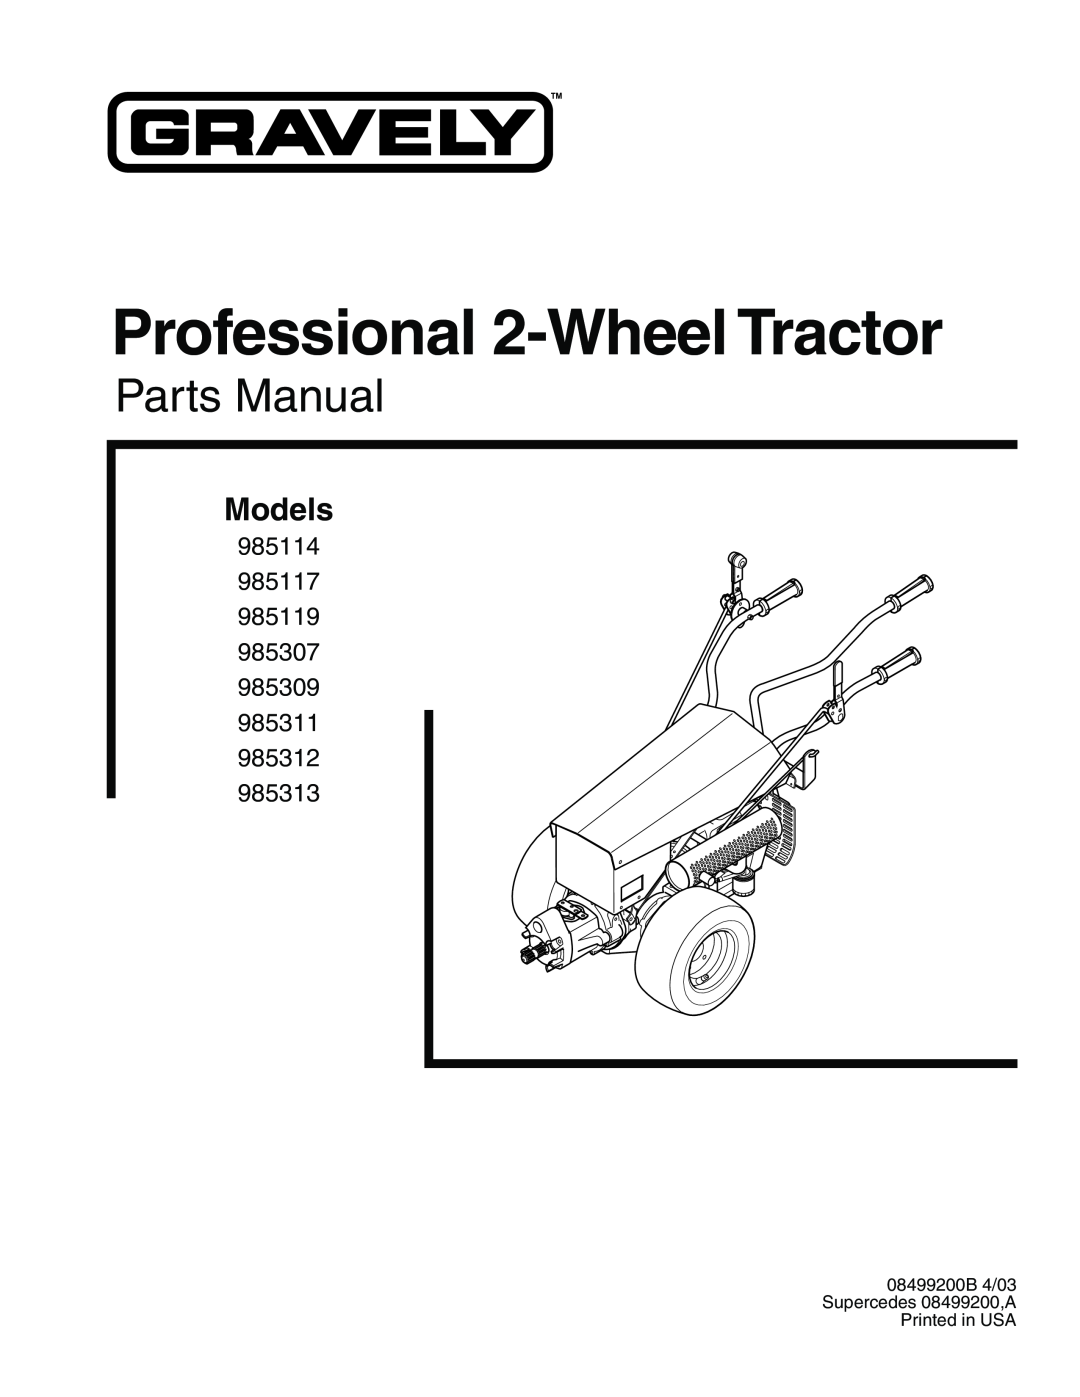 Gravely 985115, 985114, 985117, 985119, 985312, 985307, 985309, 985311 manual Professional 2-Wheel Tractor, Parts Manual, Models 